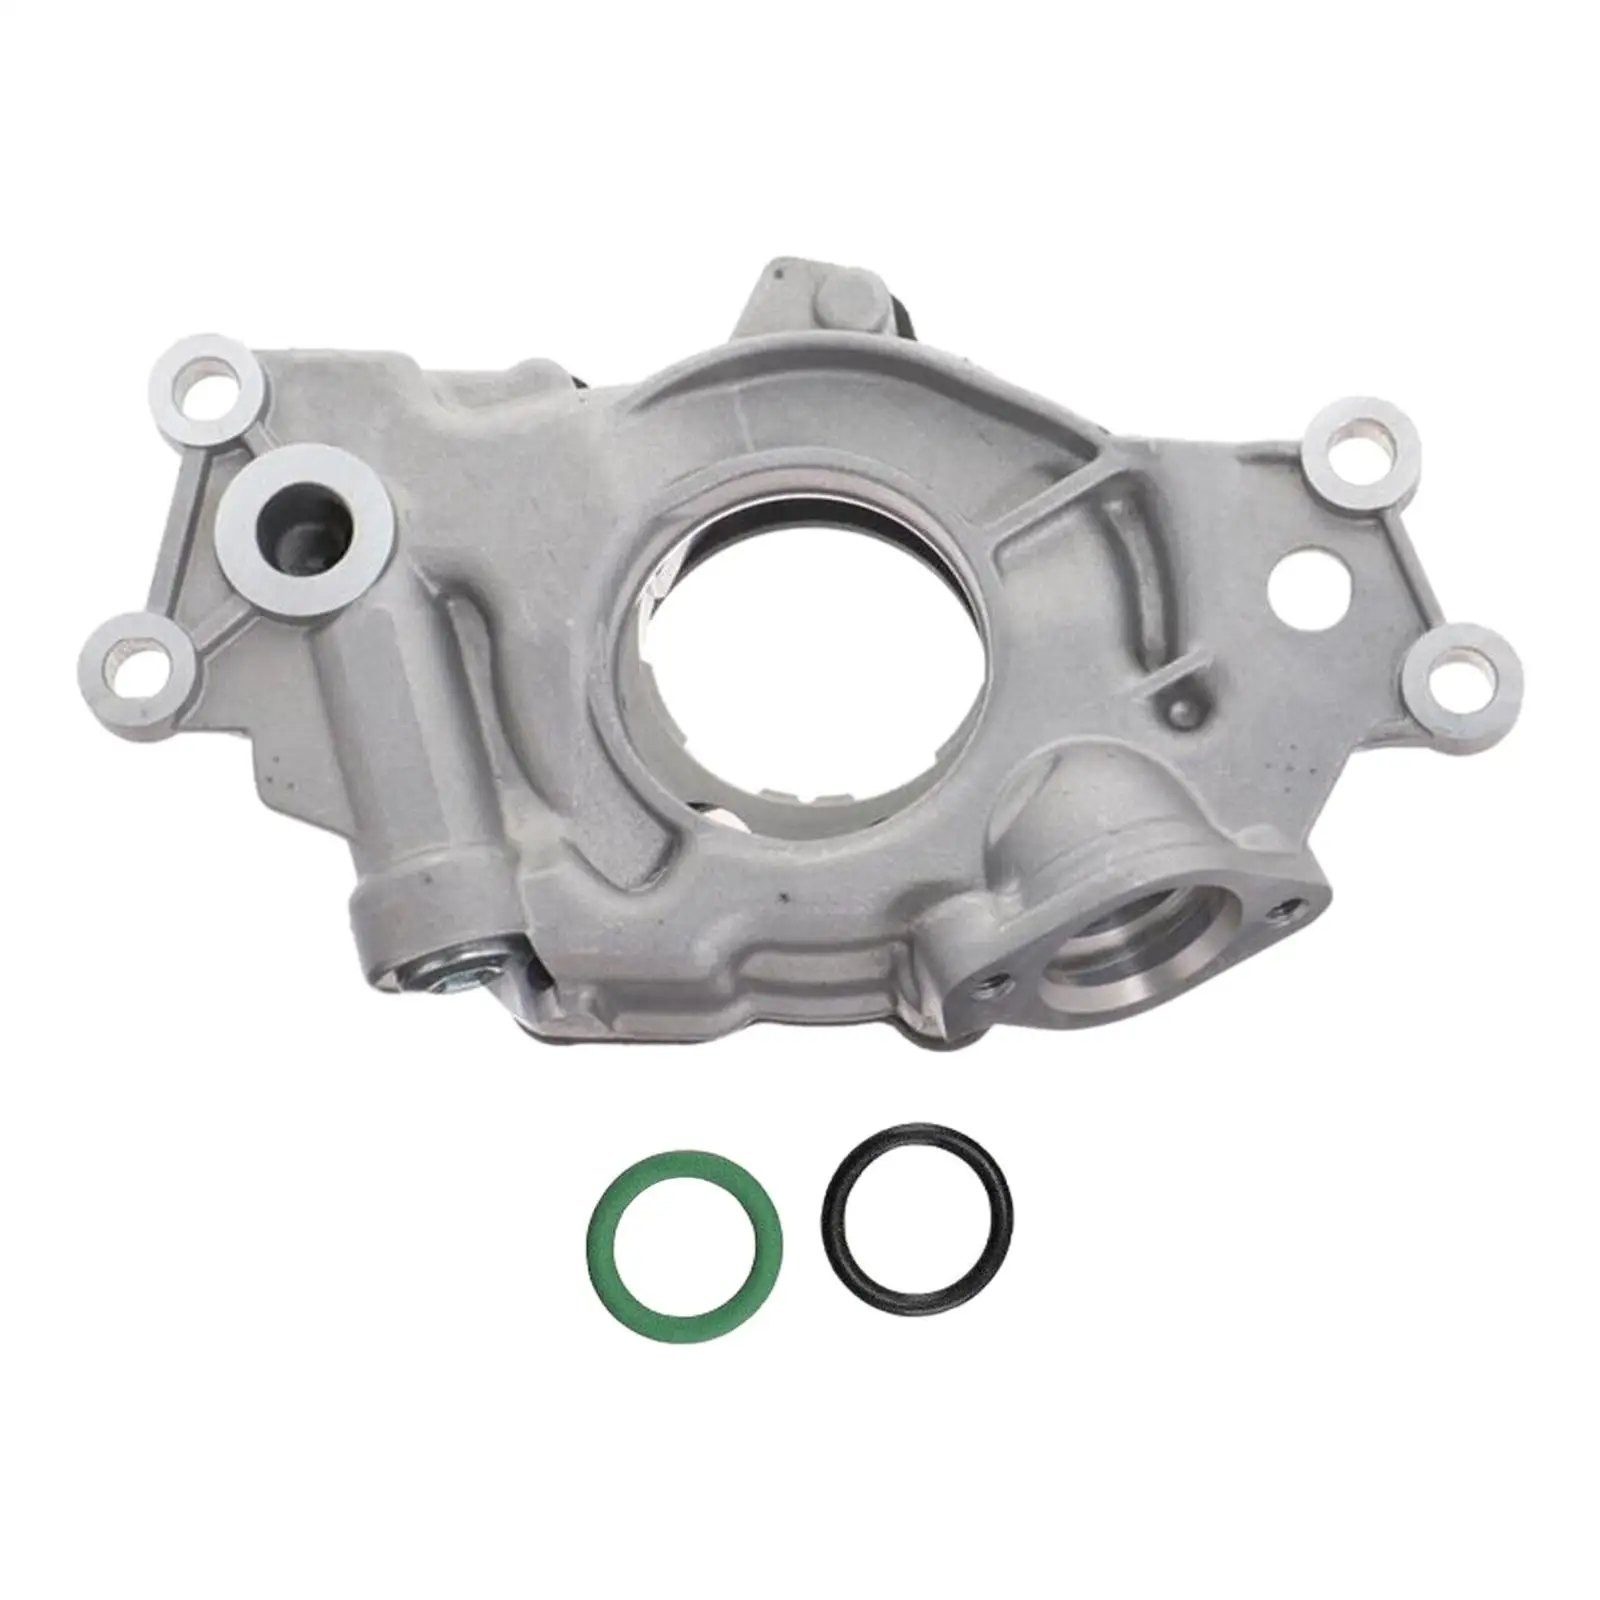 Engine Oil Pump Replacement Easy to Install Hi Volume Oil Pumps for Gen 4 Ls-based Engines 5.3L 6.0L 6.2L L99 LC9 Lmf L94